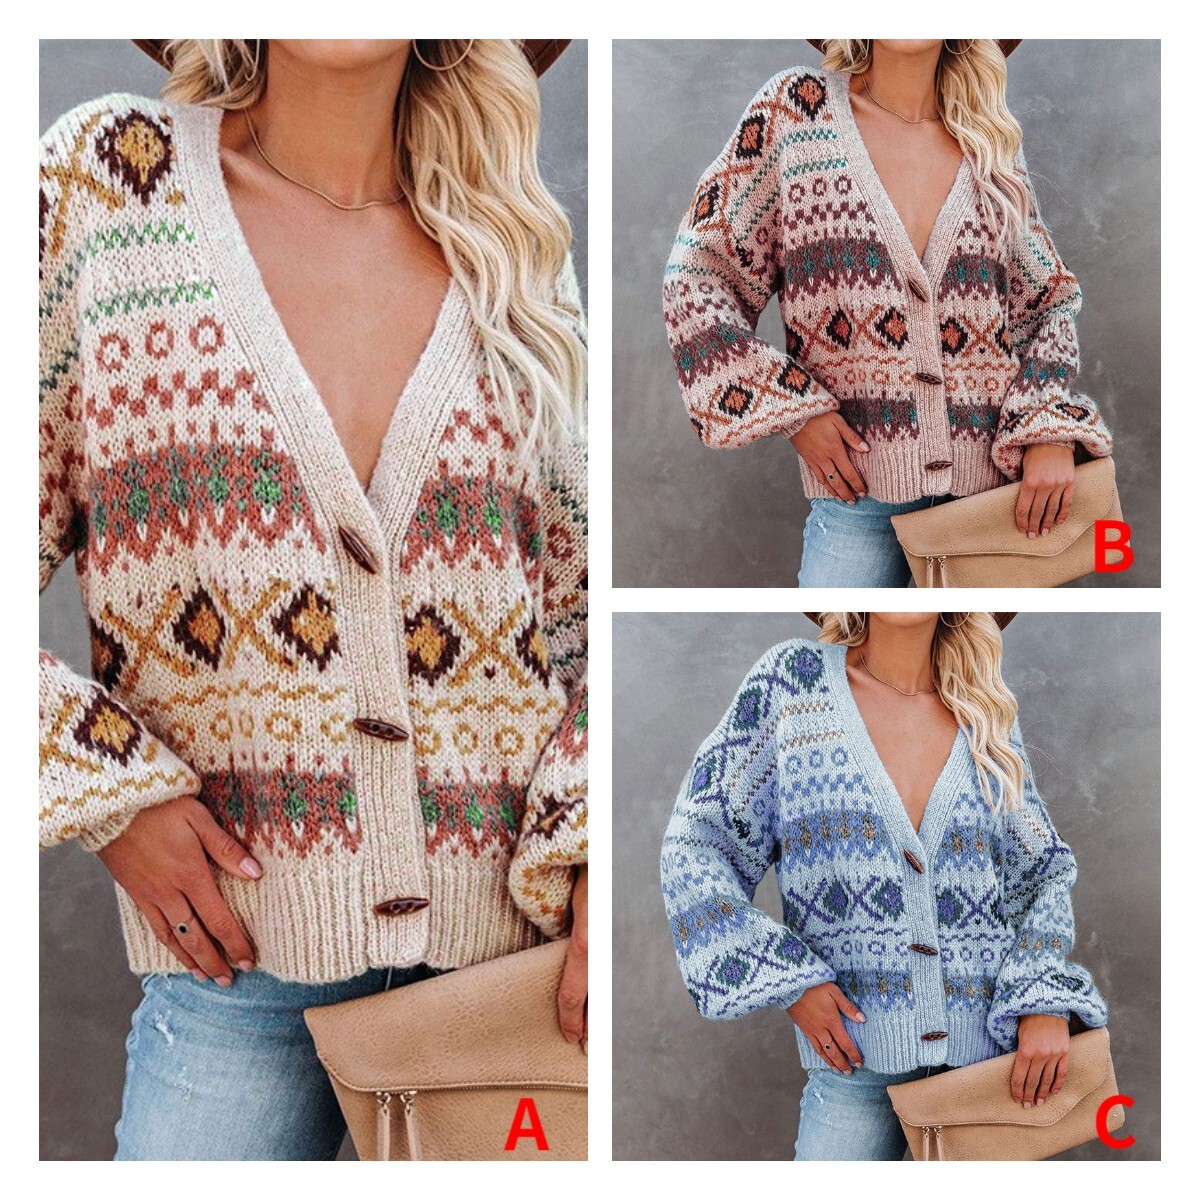 Knitted Sweater Women's Loose Casual V-neck Cardigan Sweater Coat C03654